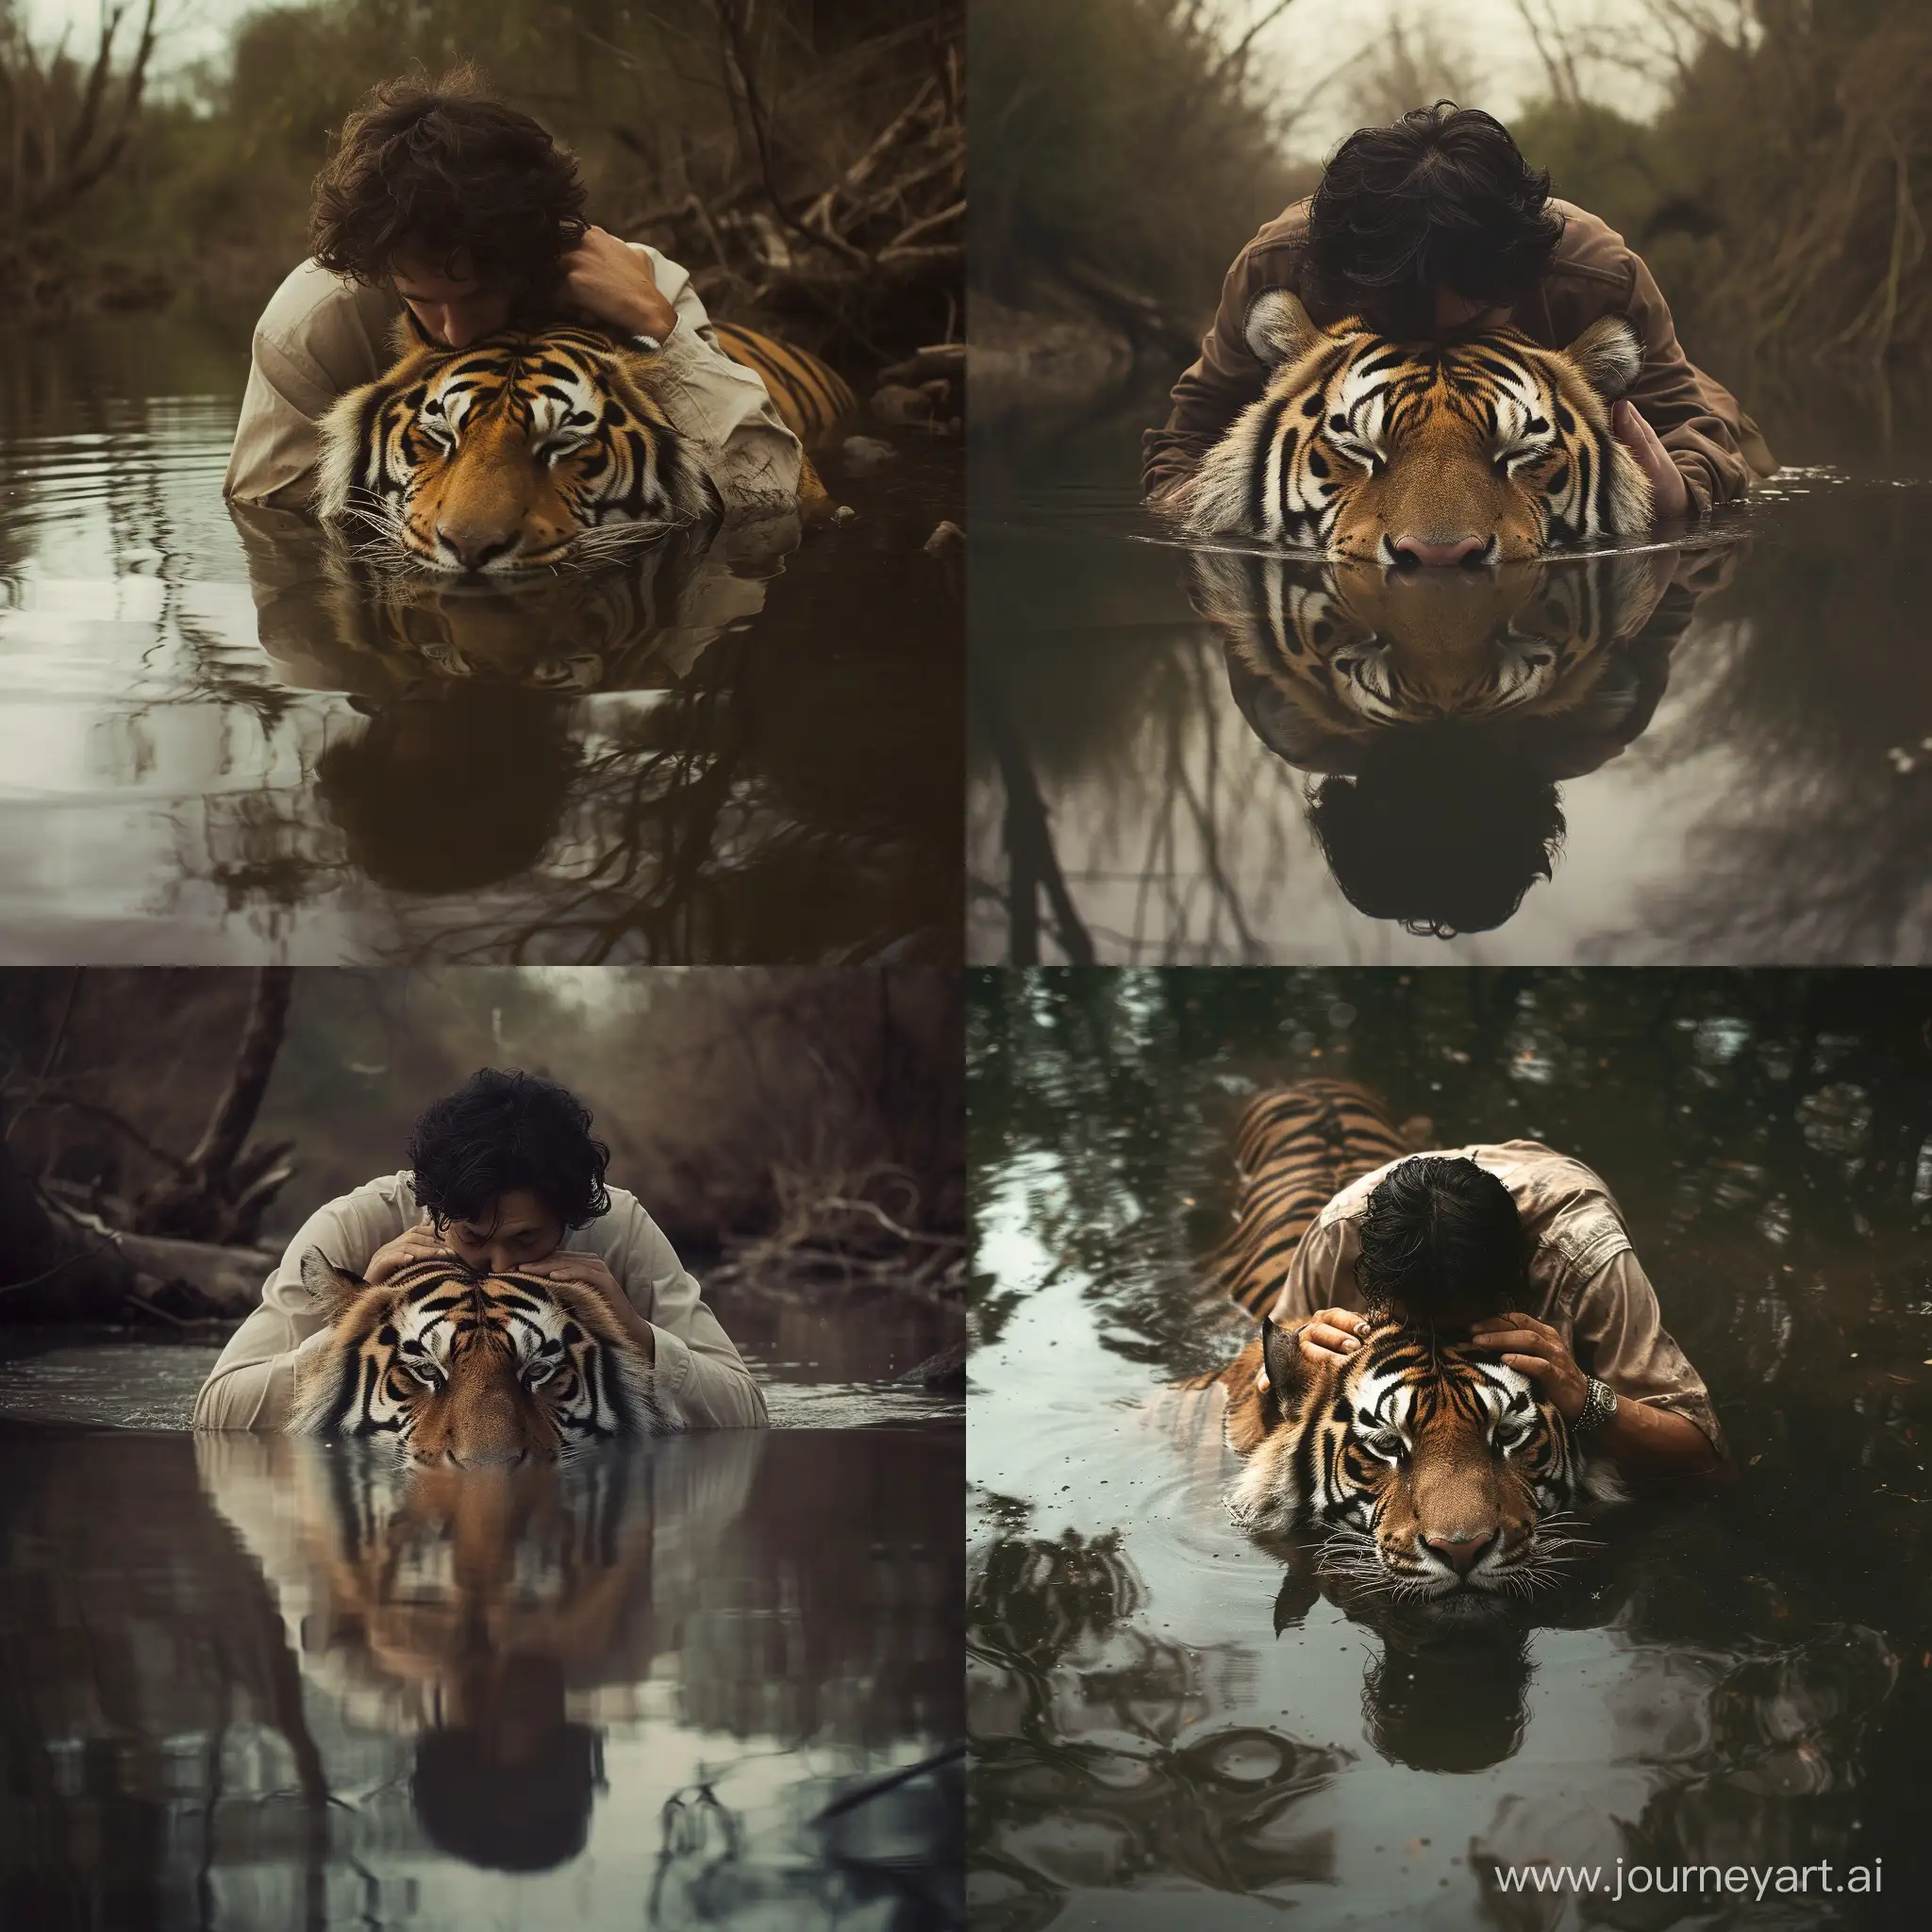 Harmonious-Bond-Man-and-Tiger-Reflecting-in-River